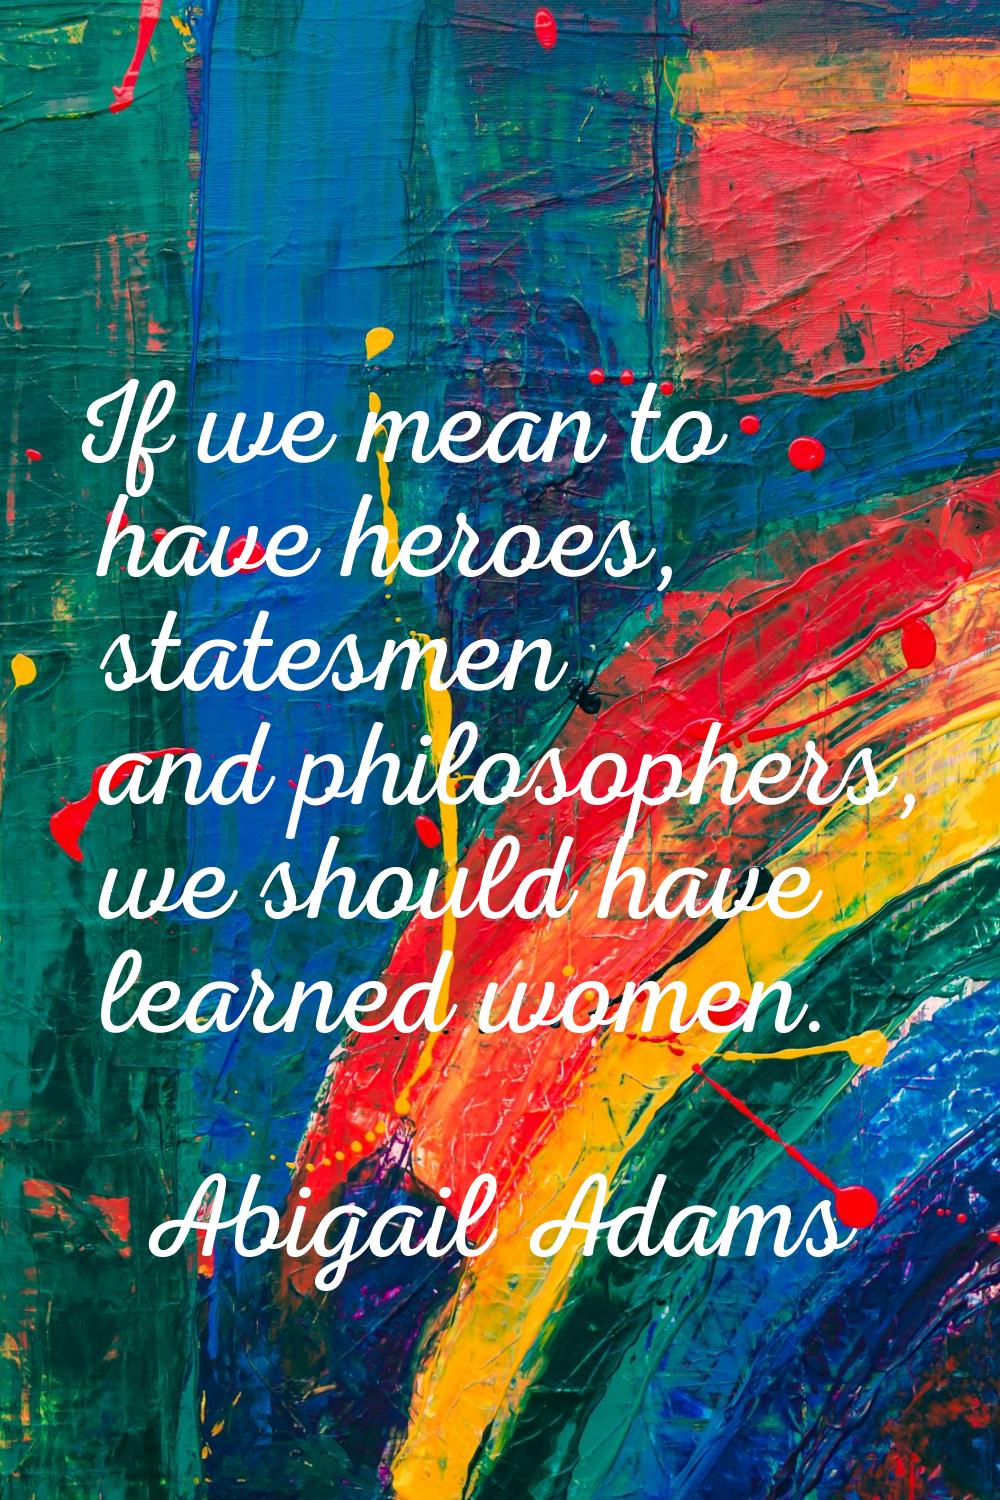 If we mean to have heroes, statesmen and philosophers, we should have learned women.